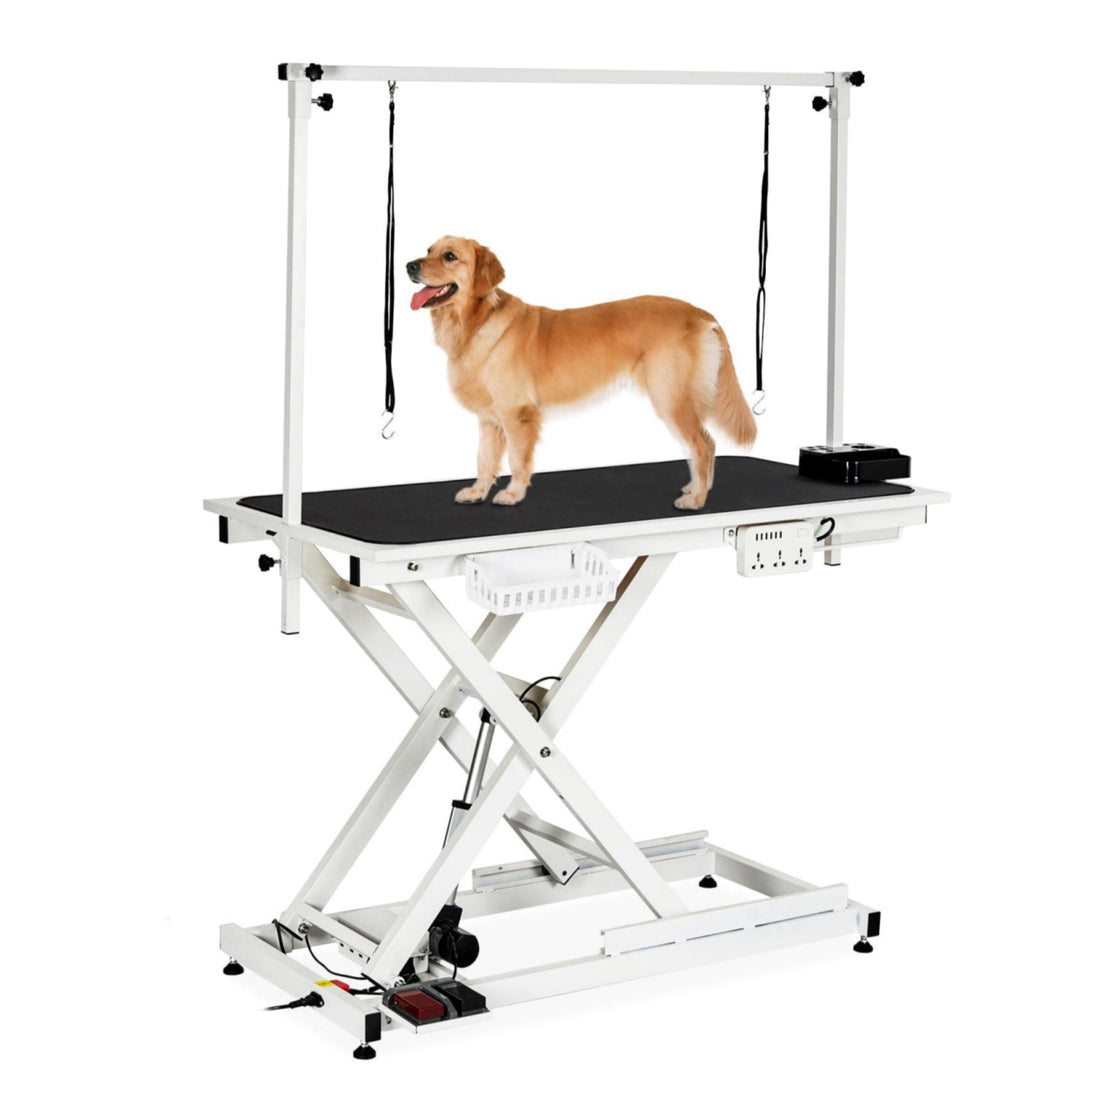 50 Inch Electric Dog Grooming Table, Heavy Duty, Height Adjustable Pet Grooming Table with Socket w/Leveling Wheels, Grooming Arm, Anti Slip Tabletop & Tool Organizer, for All Pets